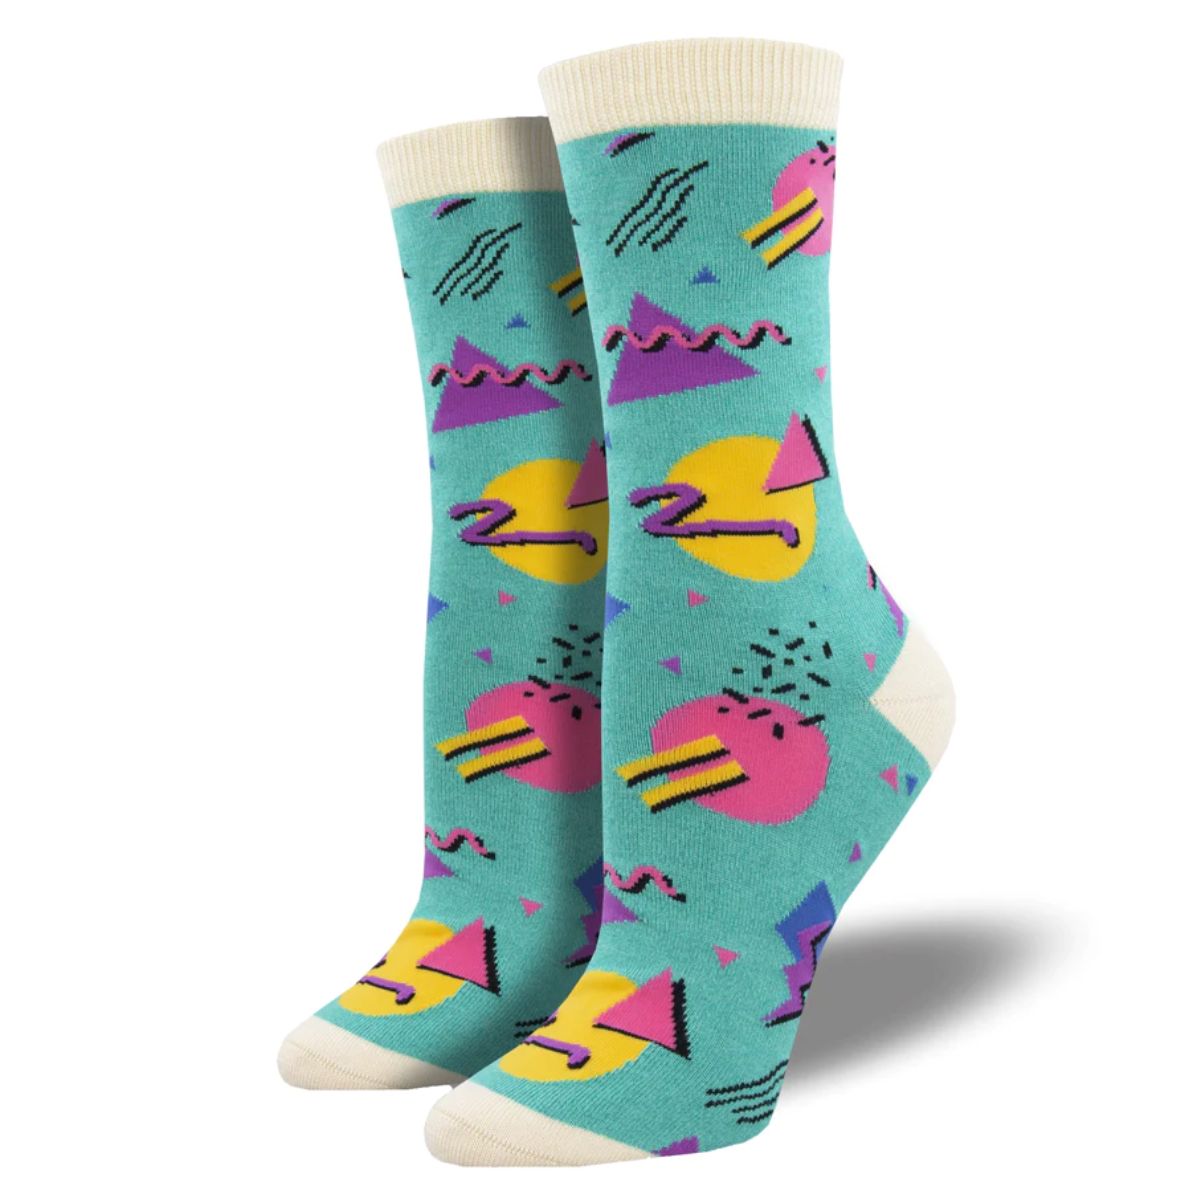 90's vibes socks a pair of teal green crew socks with funky shape print